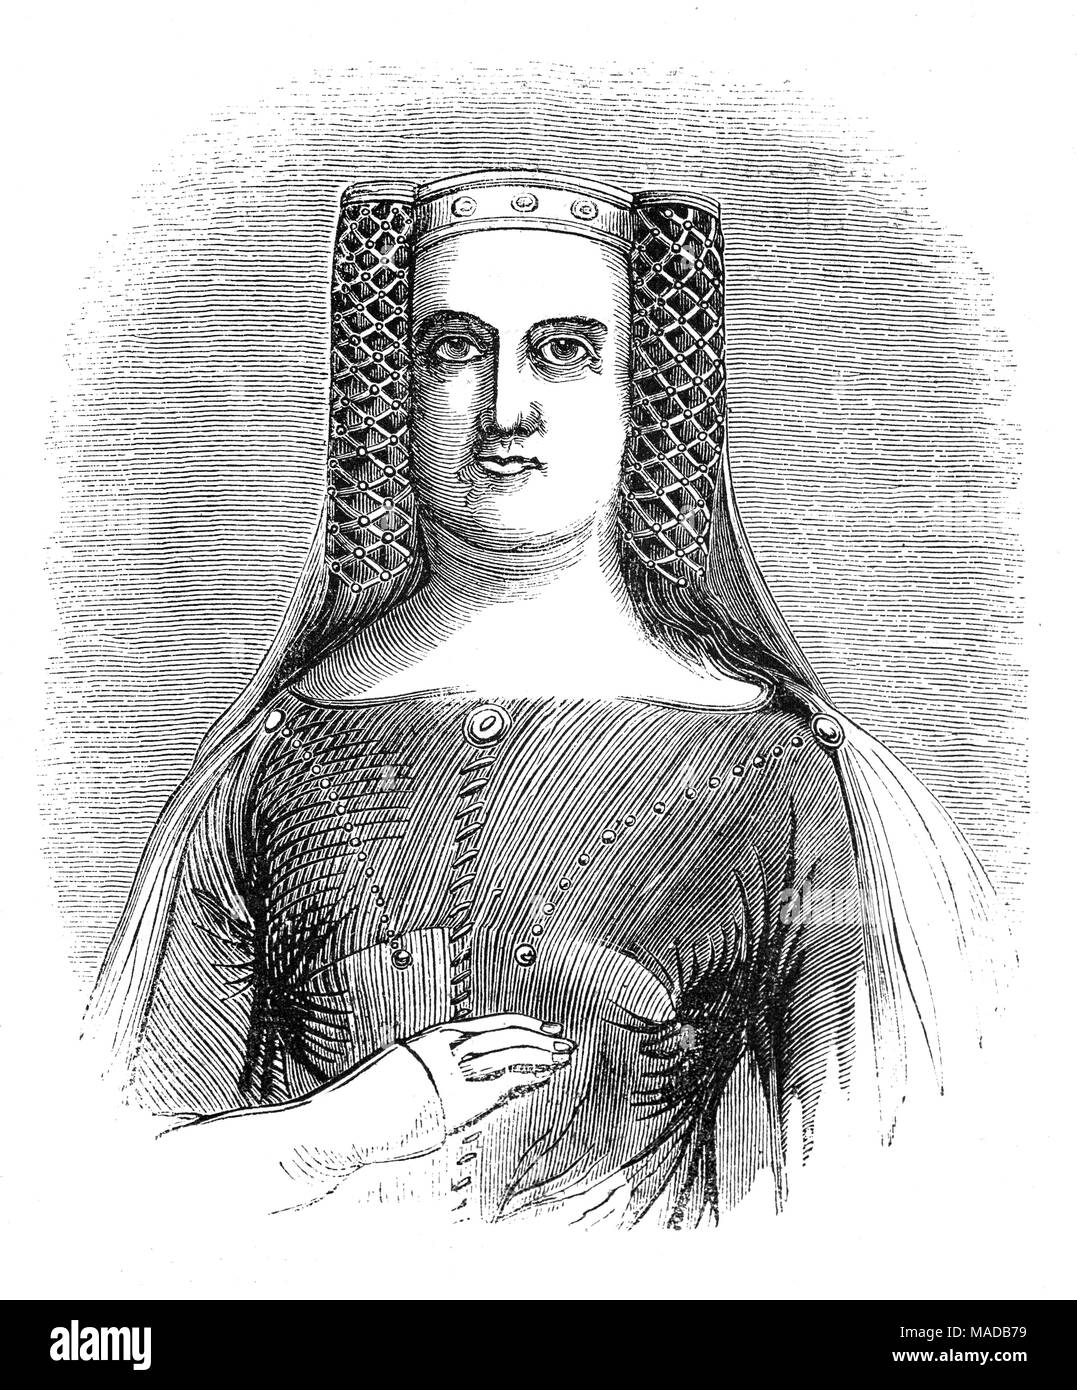 Philippa of Hainault (1314 – 1369) was Queen of England as the wife of King Edward III. Edward promised in 1326 to marry her within the following two years. She was married to Edward, first by proxy, when Edward dispatched the Bishop of Coventry 'to marry her in his name' in Valenciennes (second city in importance of the county of Hainaut). The marriage was celebrated formally in York Minster on 24 January 1328, some months after Edward's accession to the throne of England. Stock Photo